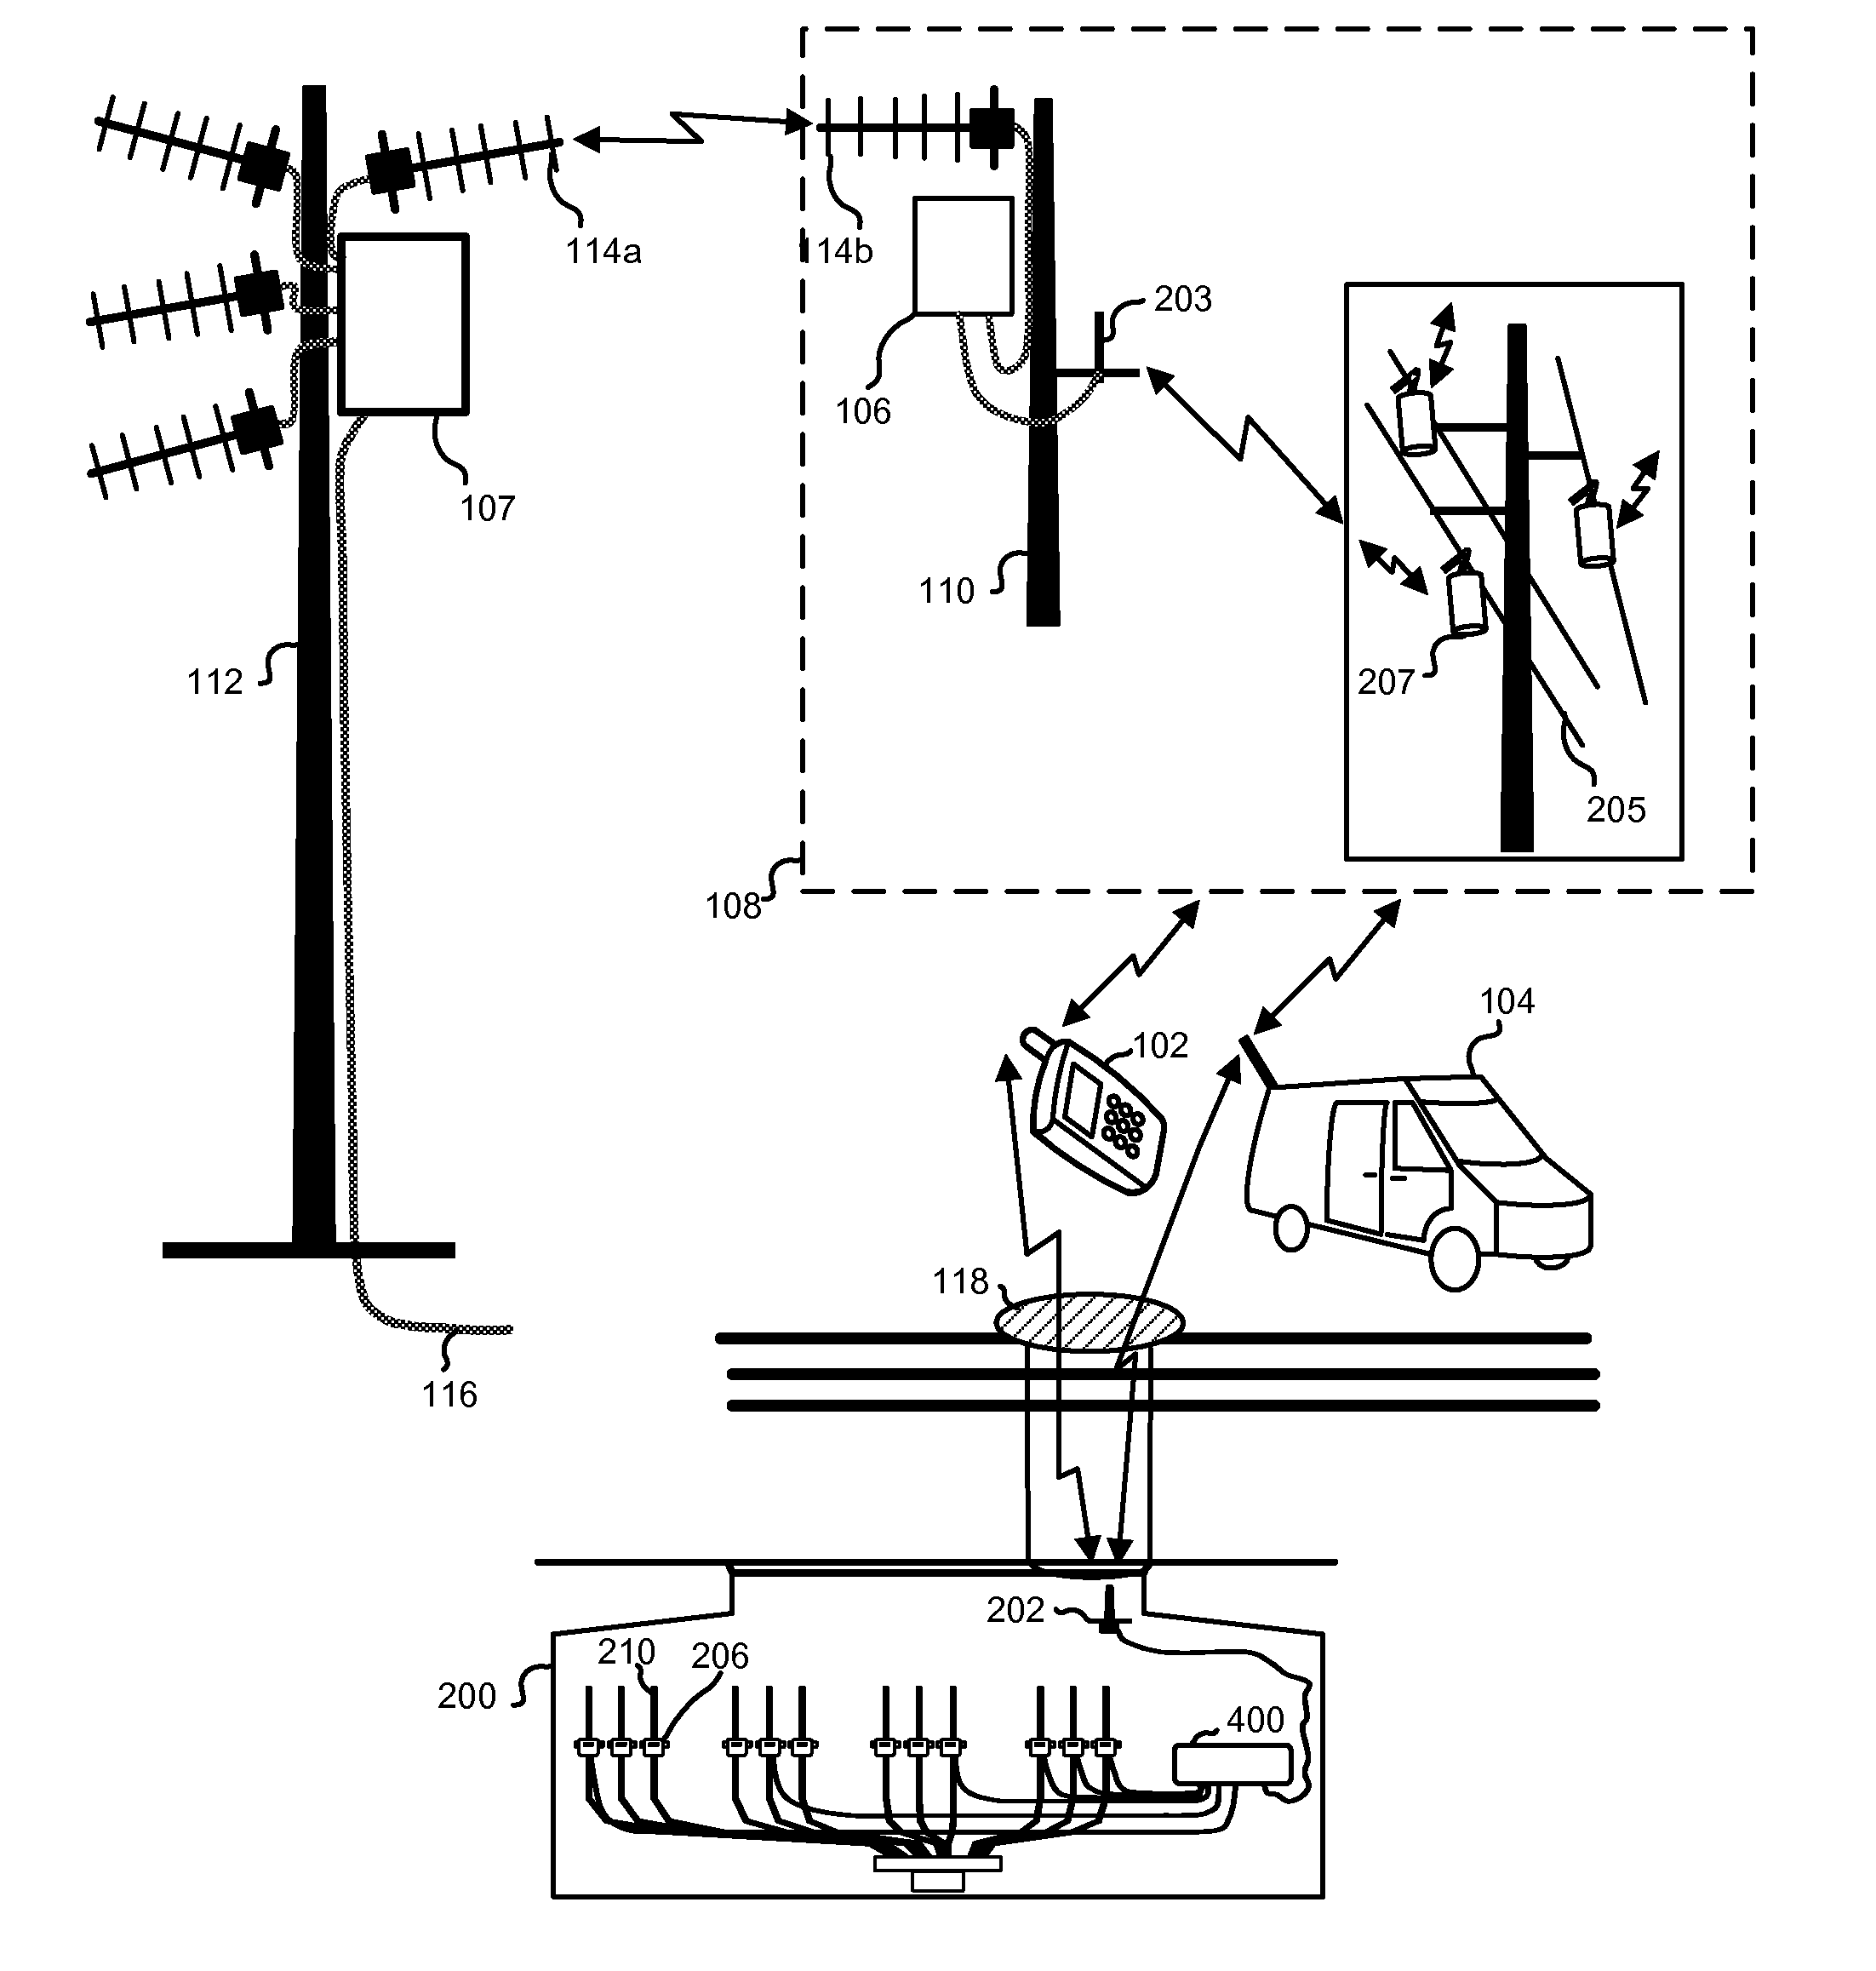 Magnetic probe apparatus and method for providing a wireless connection to a detection device